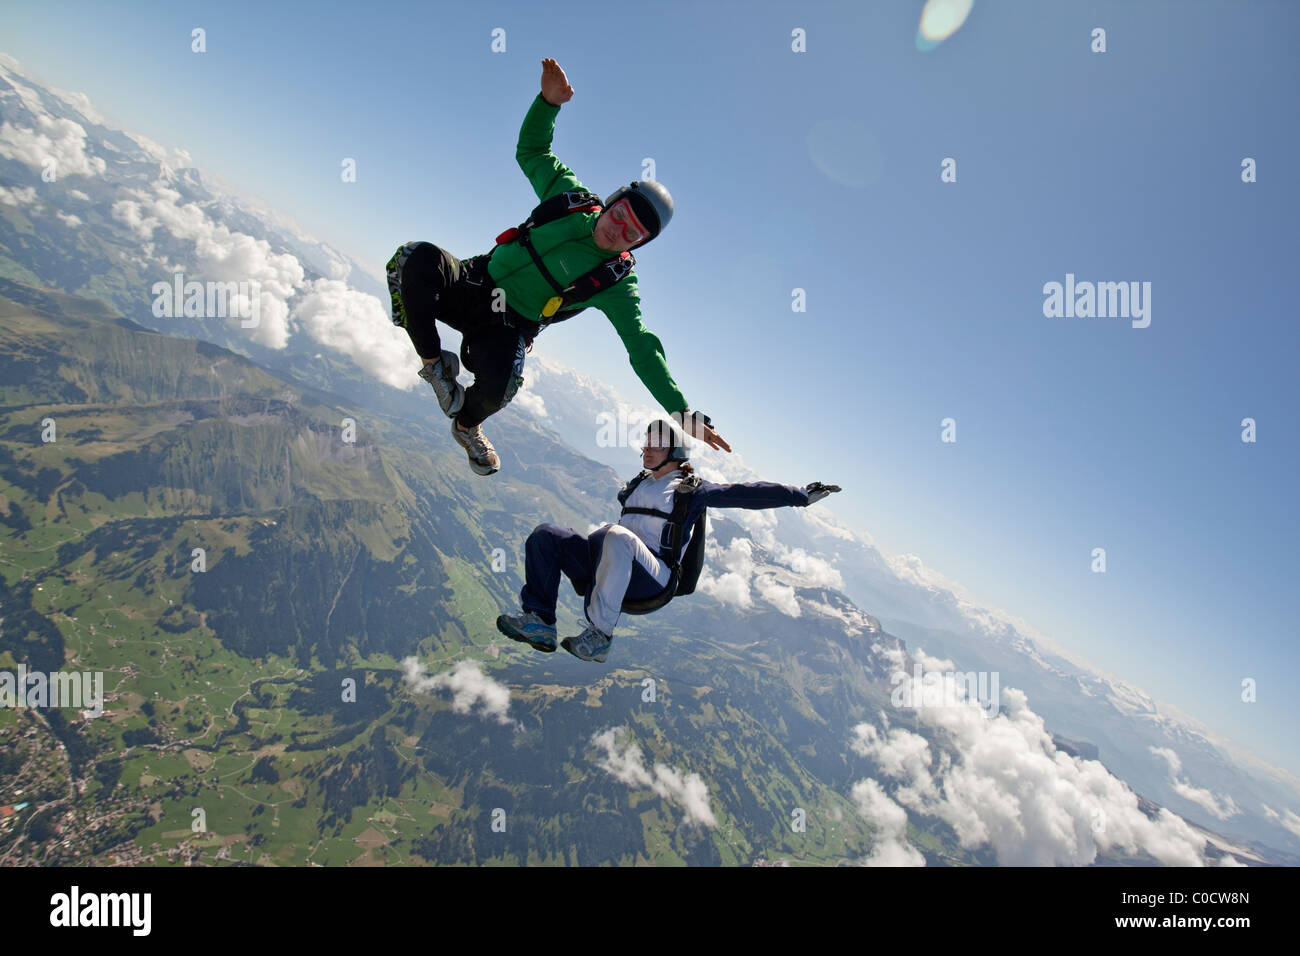 Man in green jumpsuit and girl in white dress are skydiving together over cloudy mountains area. Stock Photo